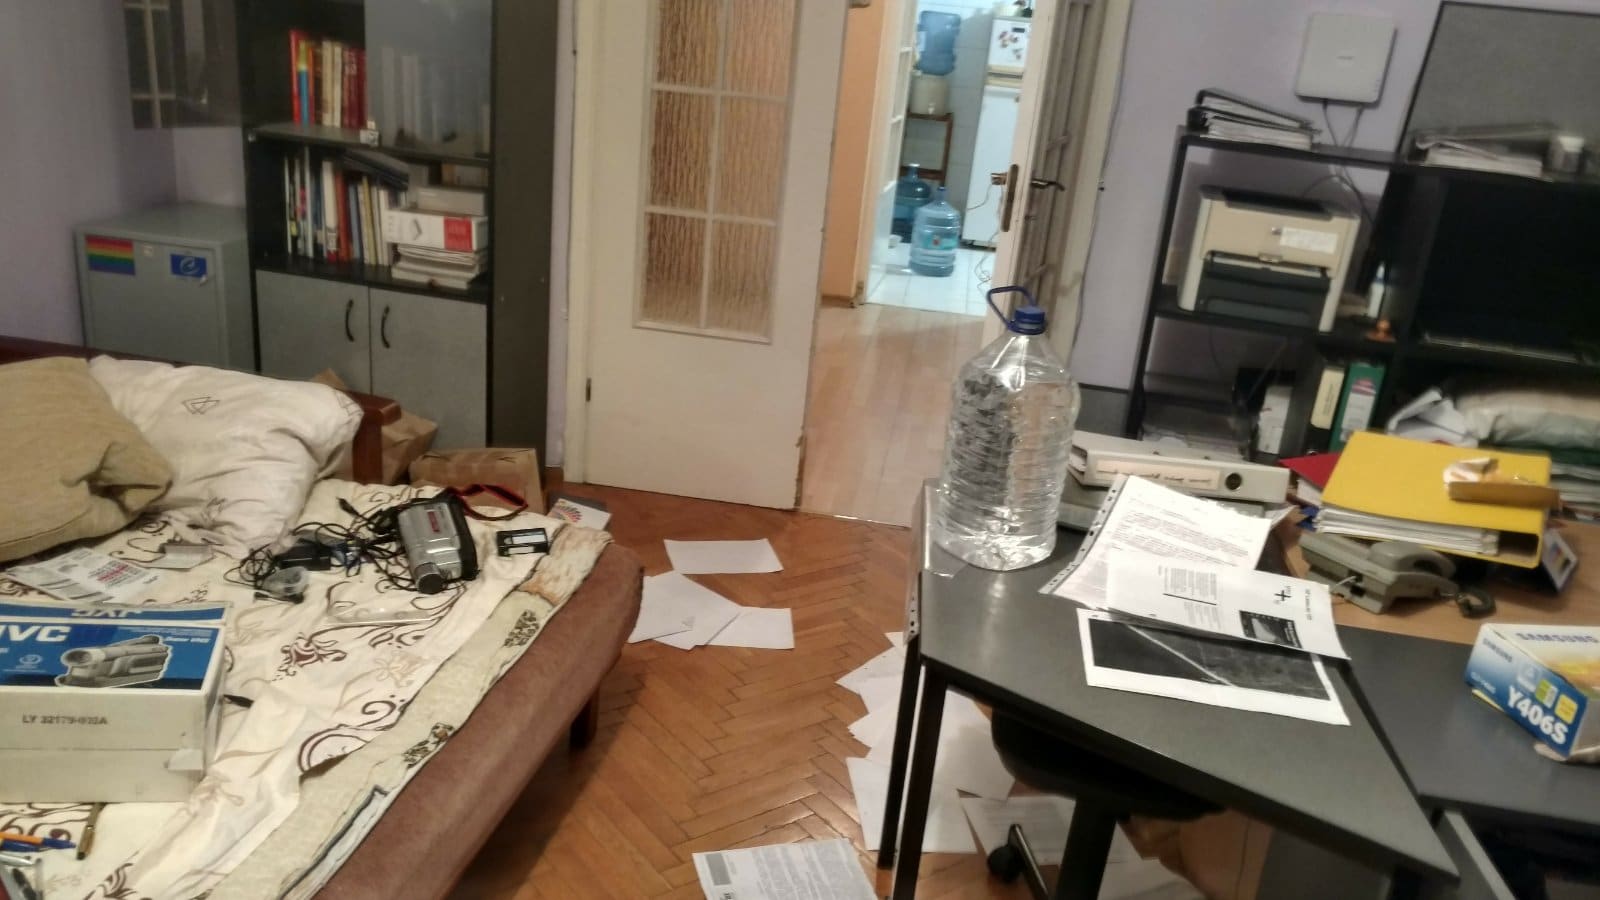 The offices of LGBT Human Rights Nash Mir Center in Kyiv were ransacked by a group of armed men. (Provided)